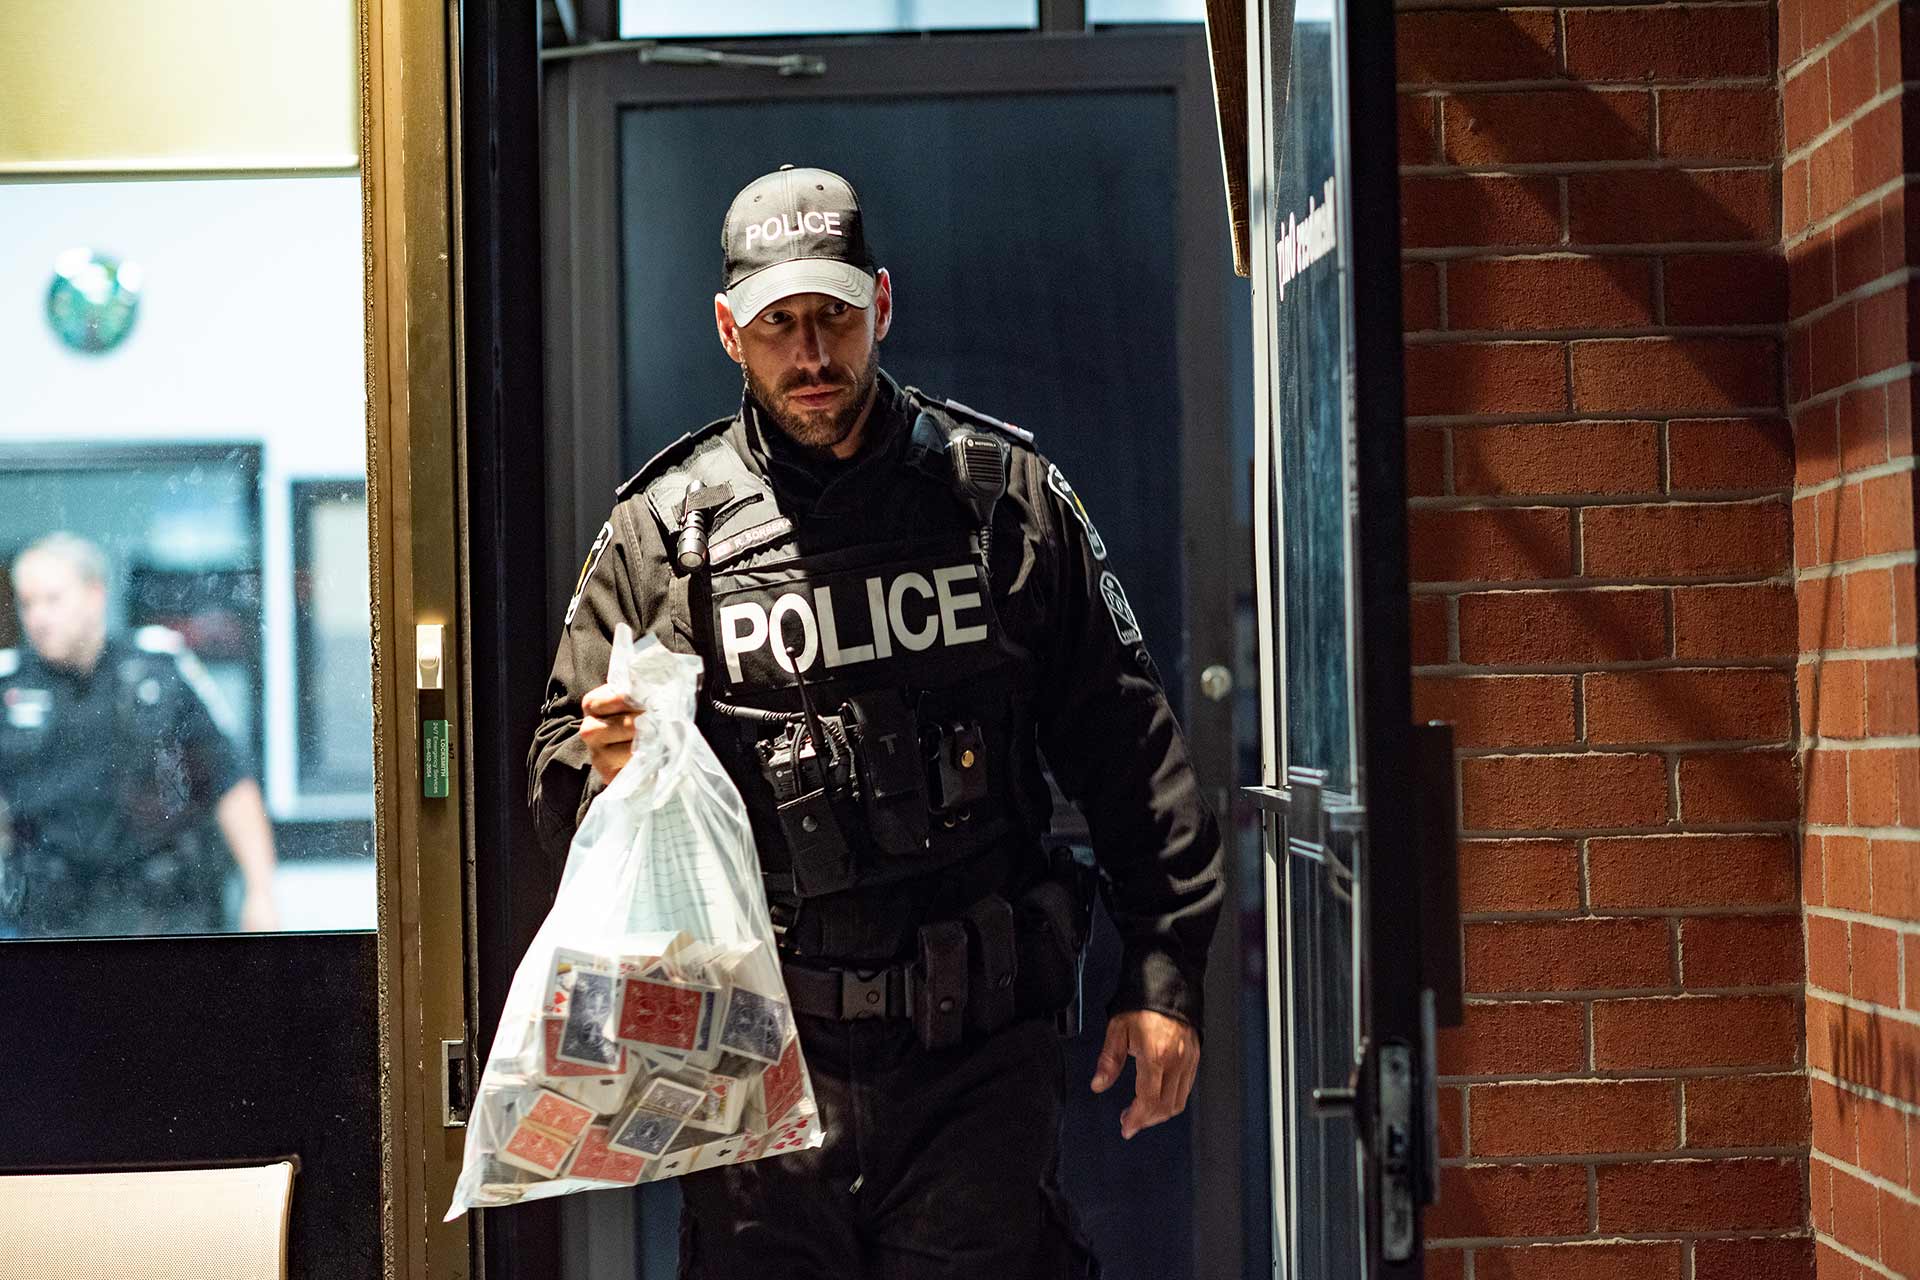 An officer emerges from a building holding alleged gambling paraphernalia eiqrkireiderinv